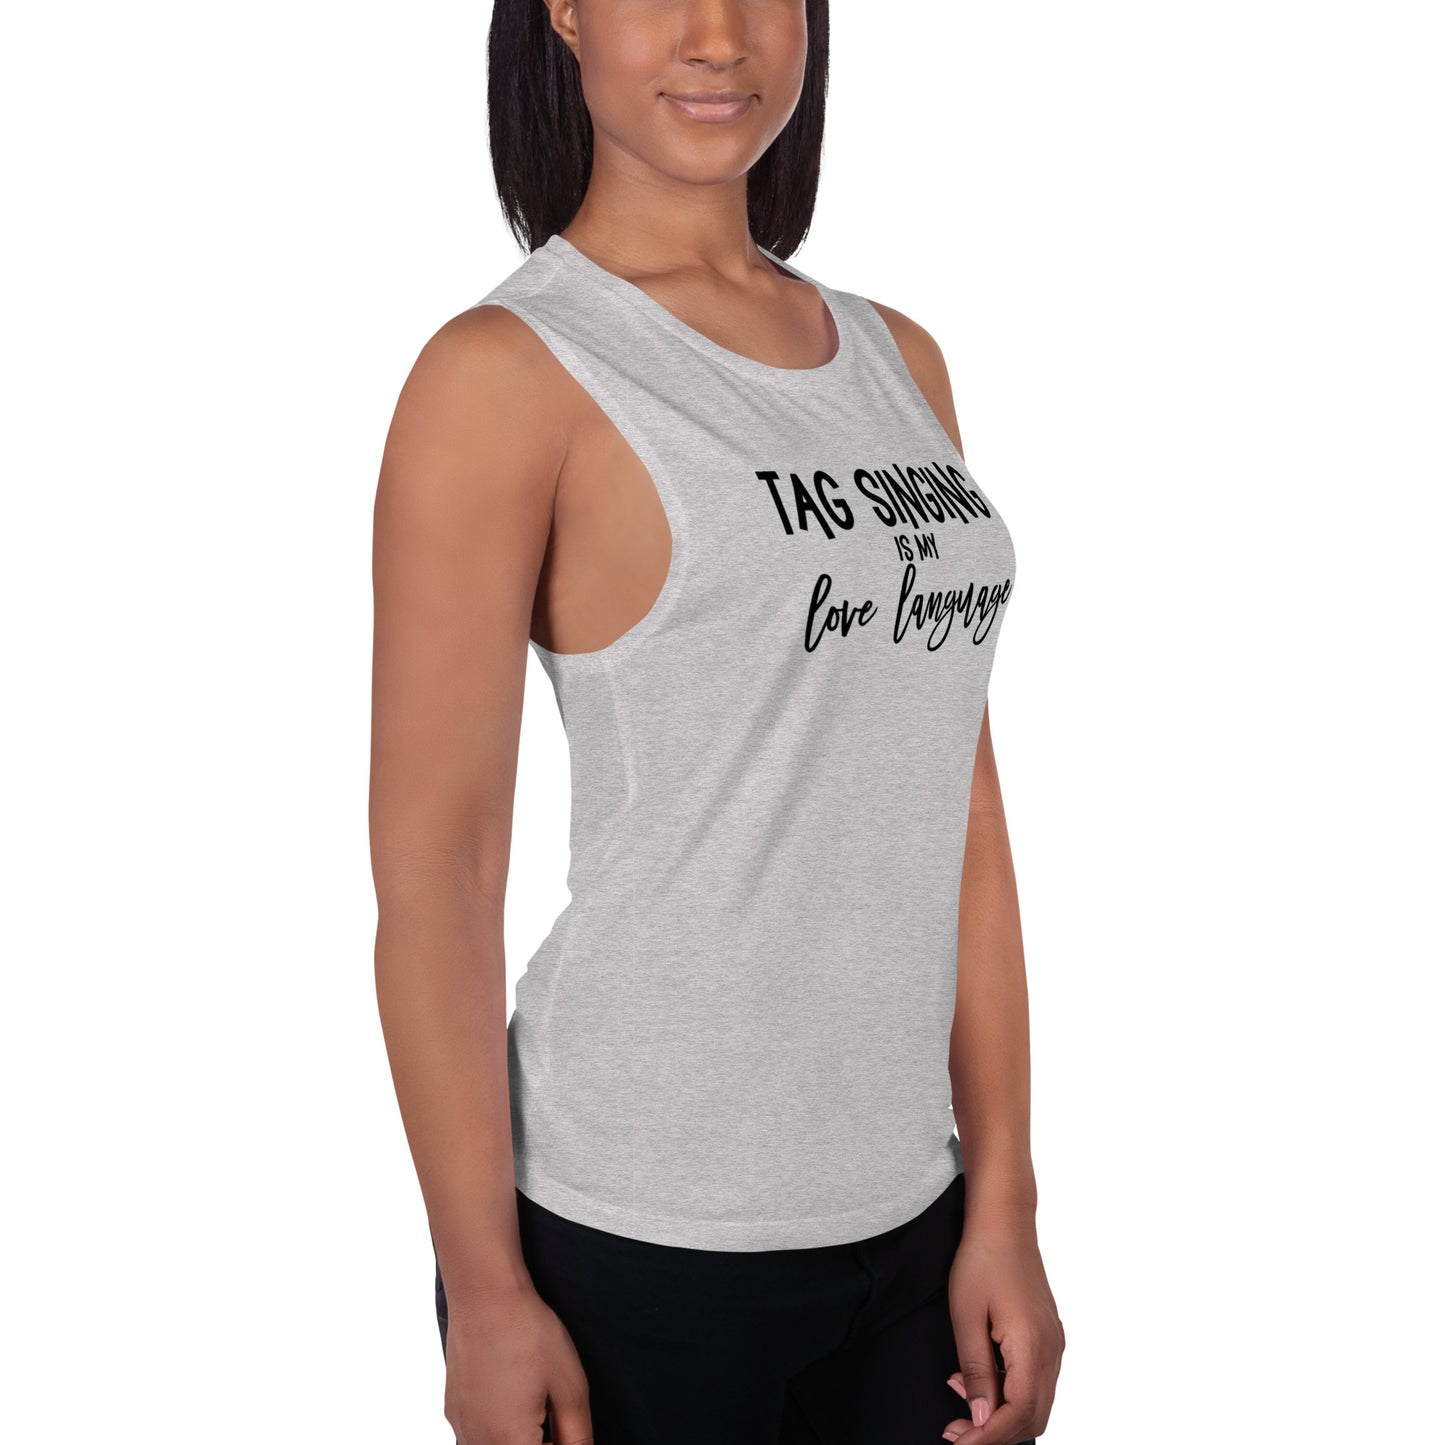 Tag singing is my love language -  Muscle Tank